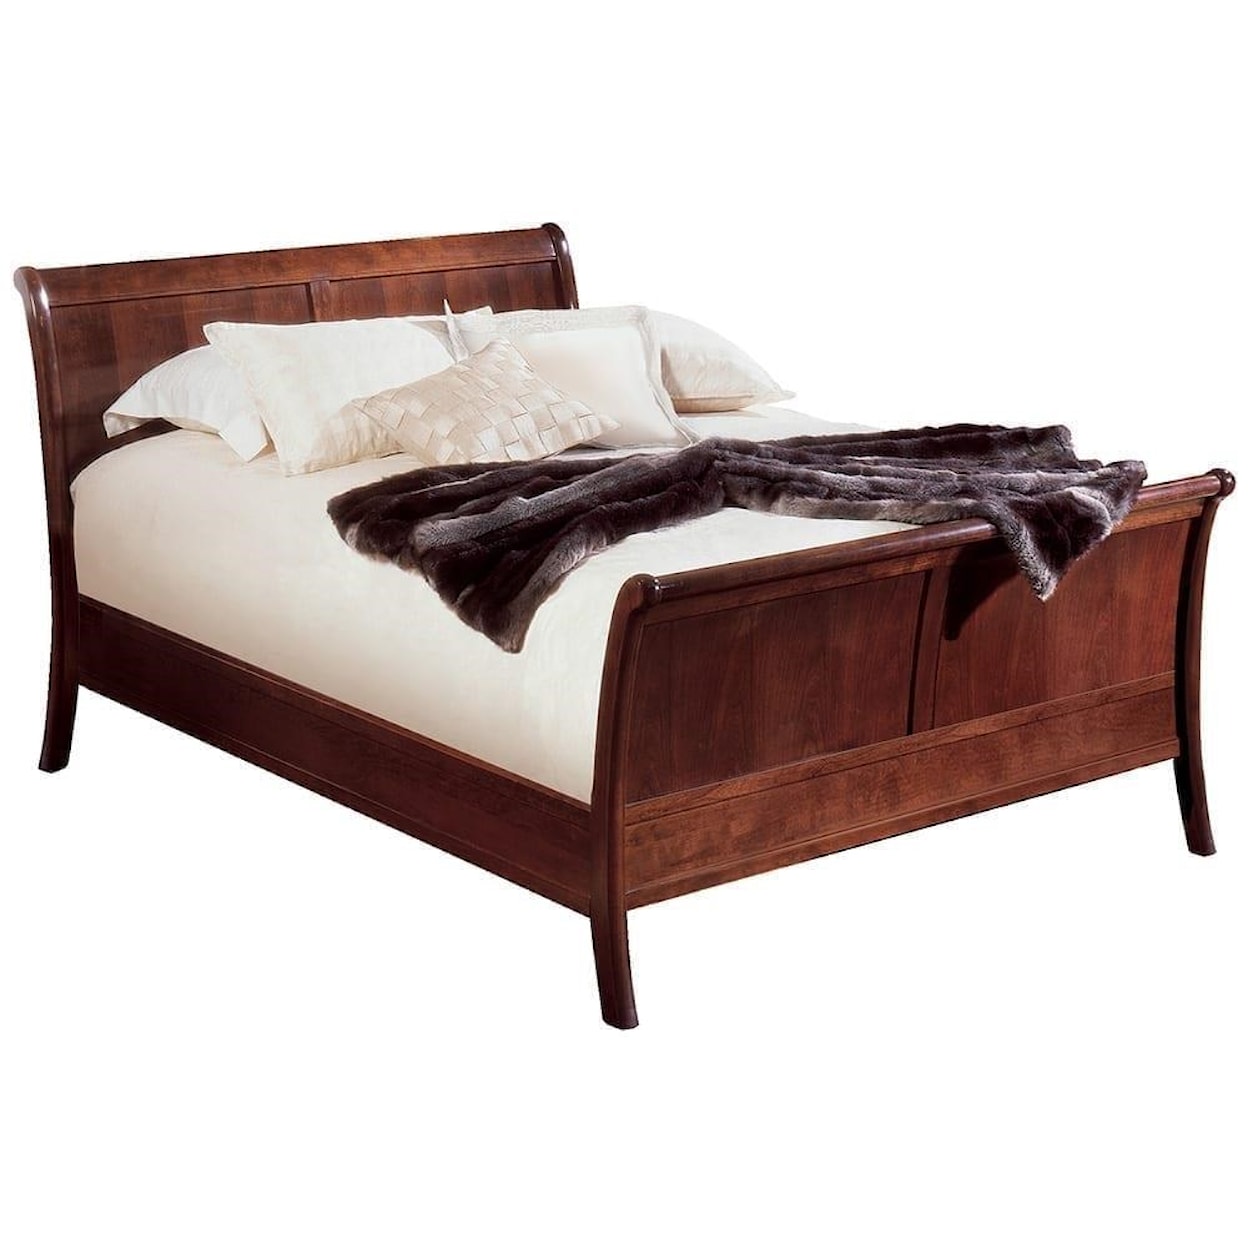 Stickley Classics Cherry and Mahogany Panel Sleigh Bed